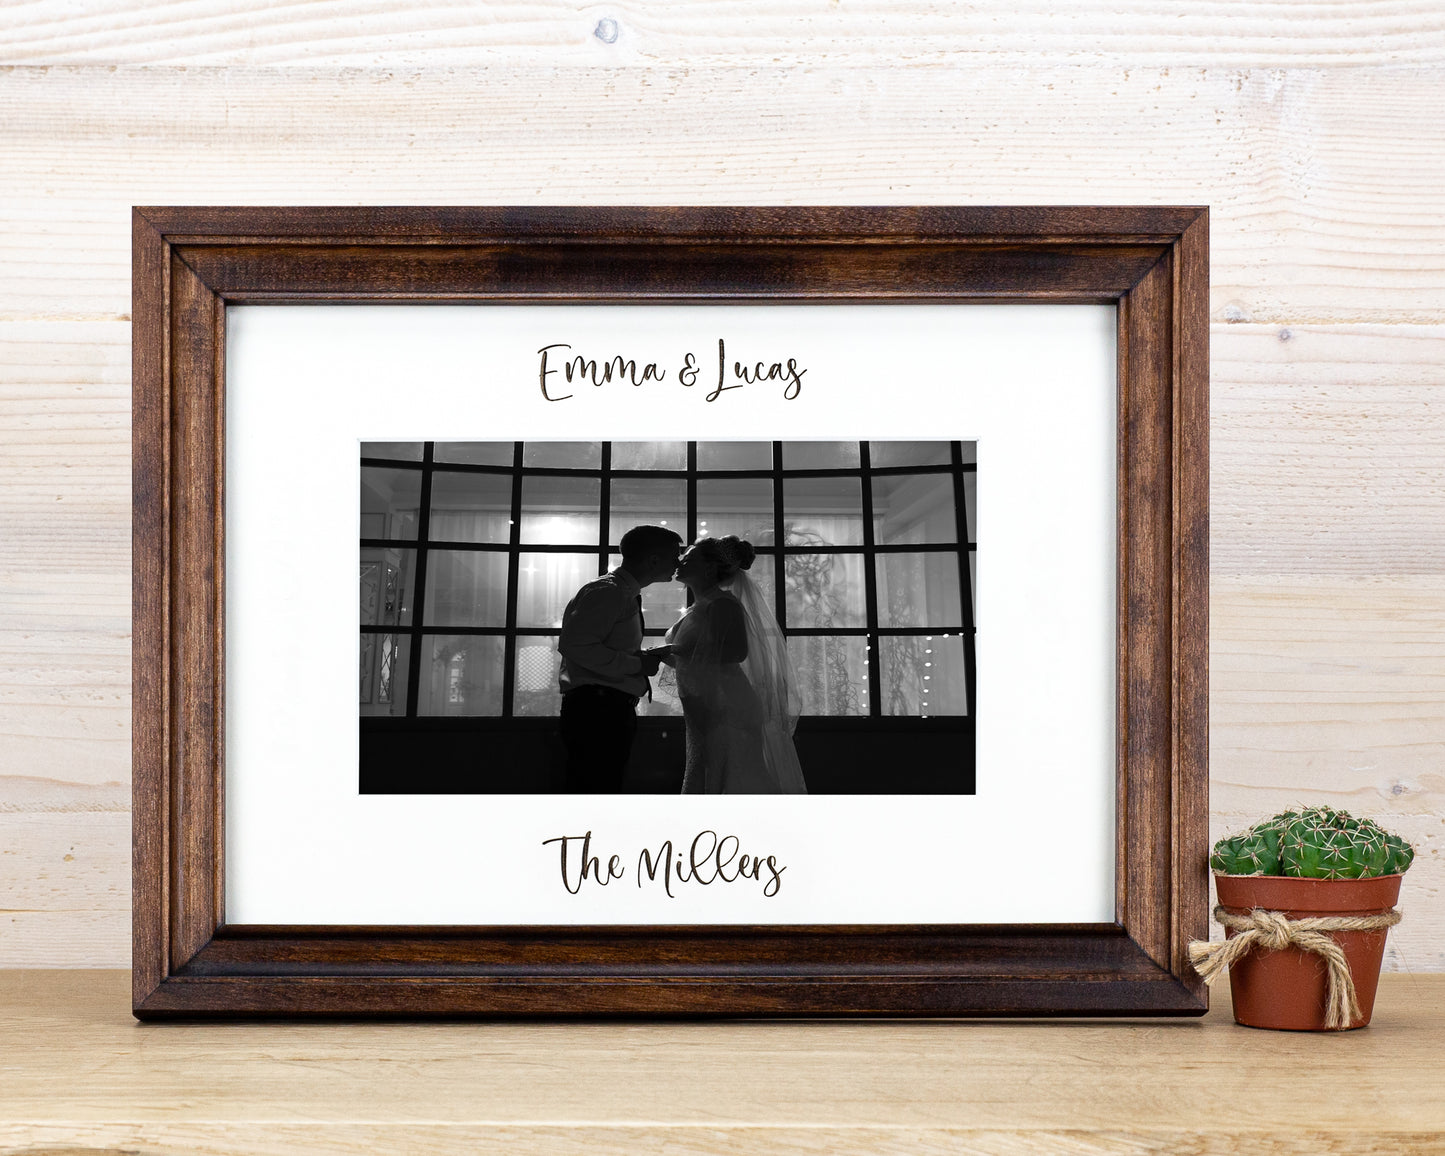 Brown Photo Frame with Engraved Mat from Solid Birch Wood